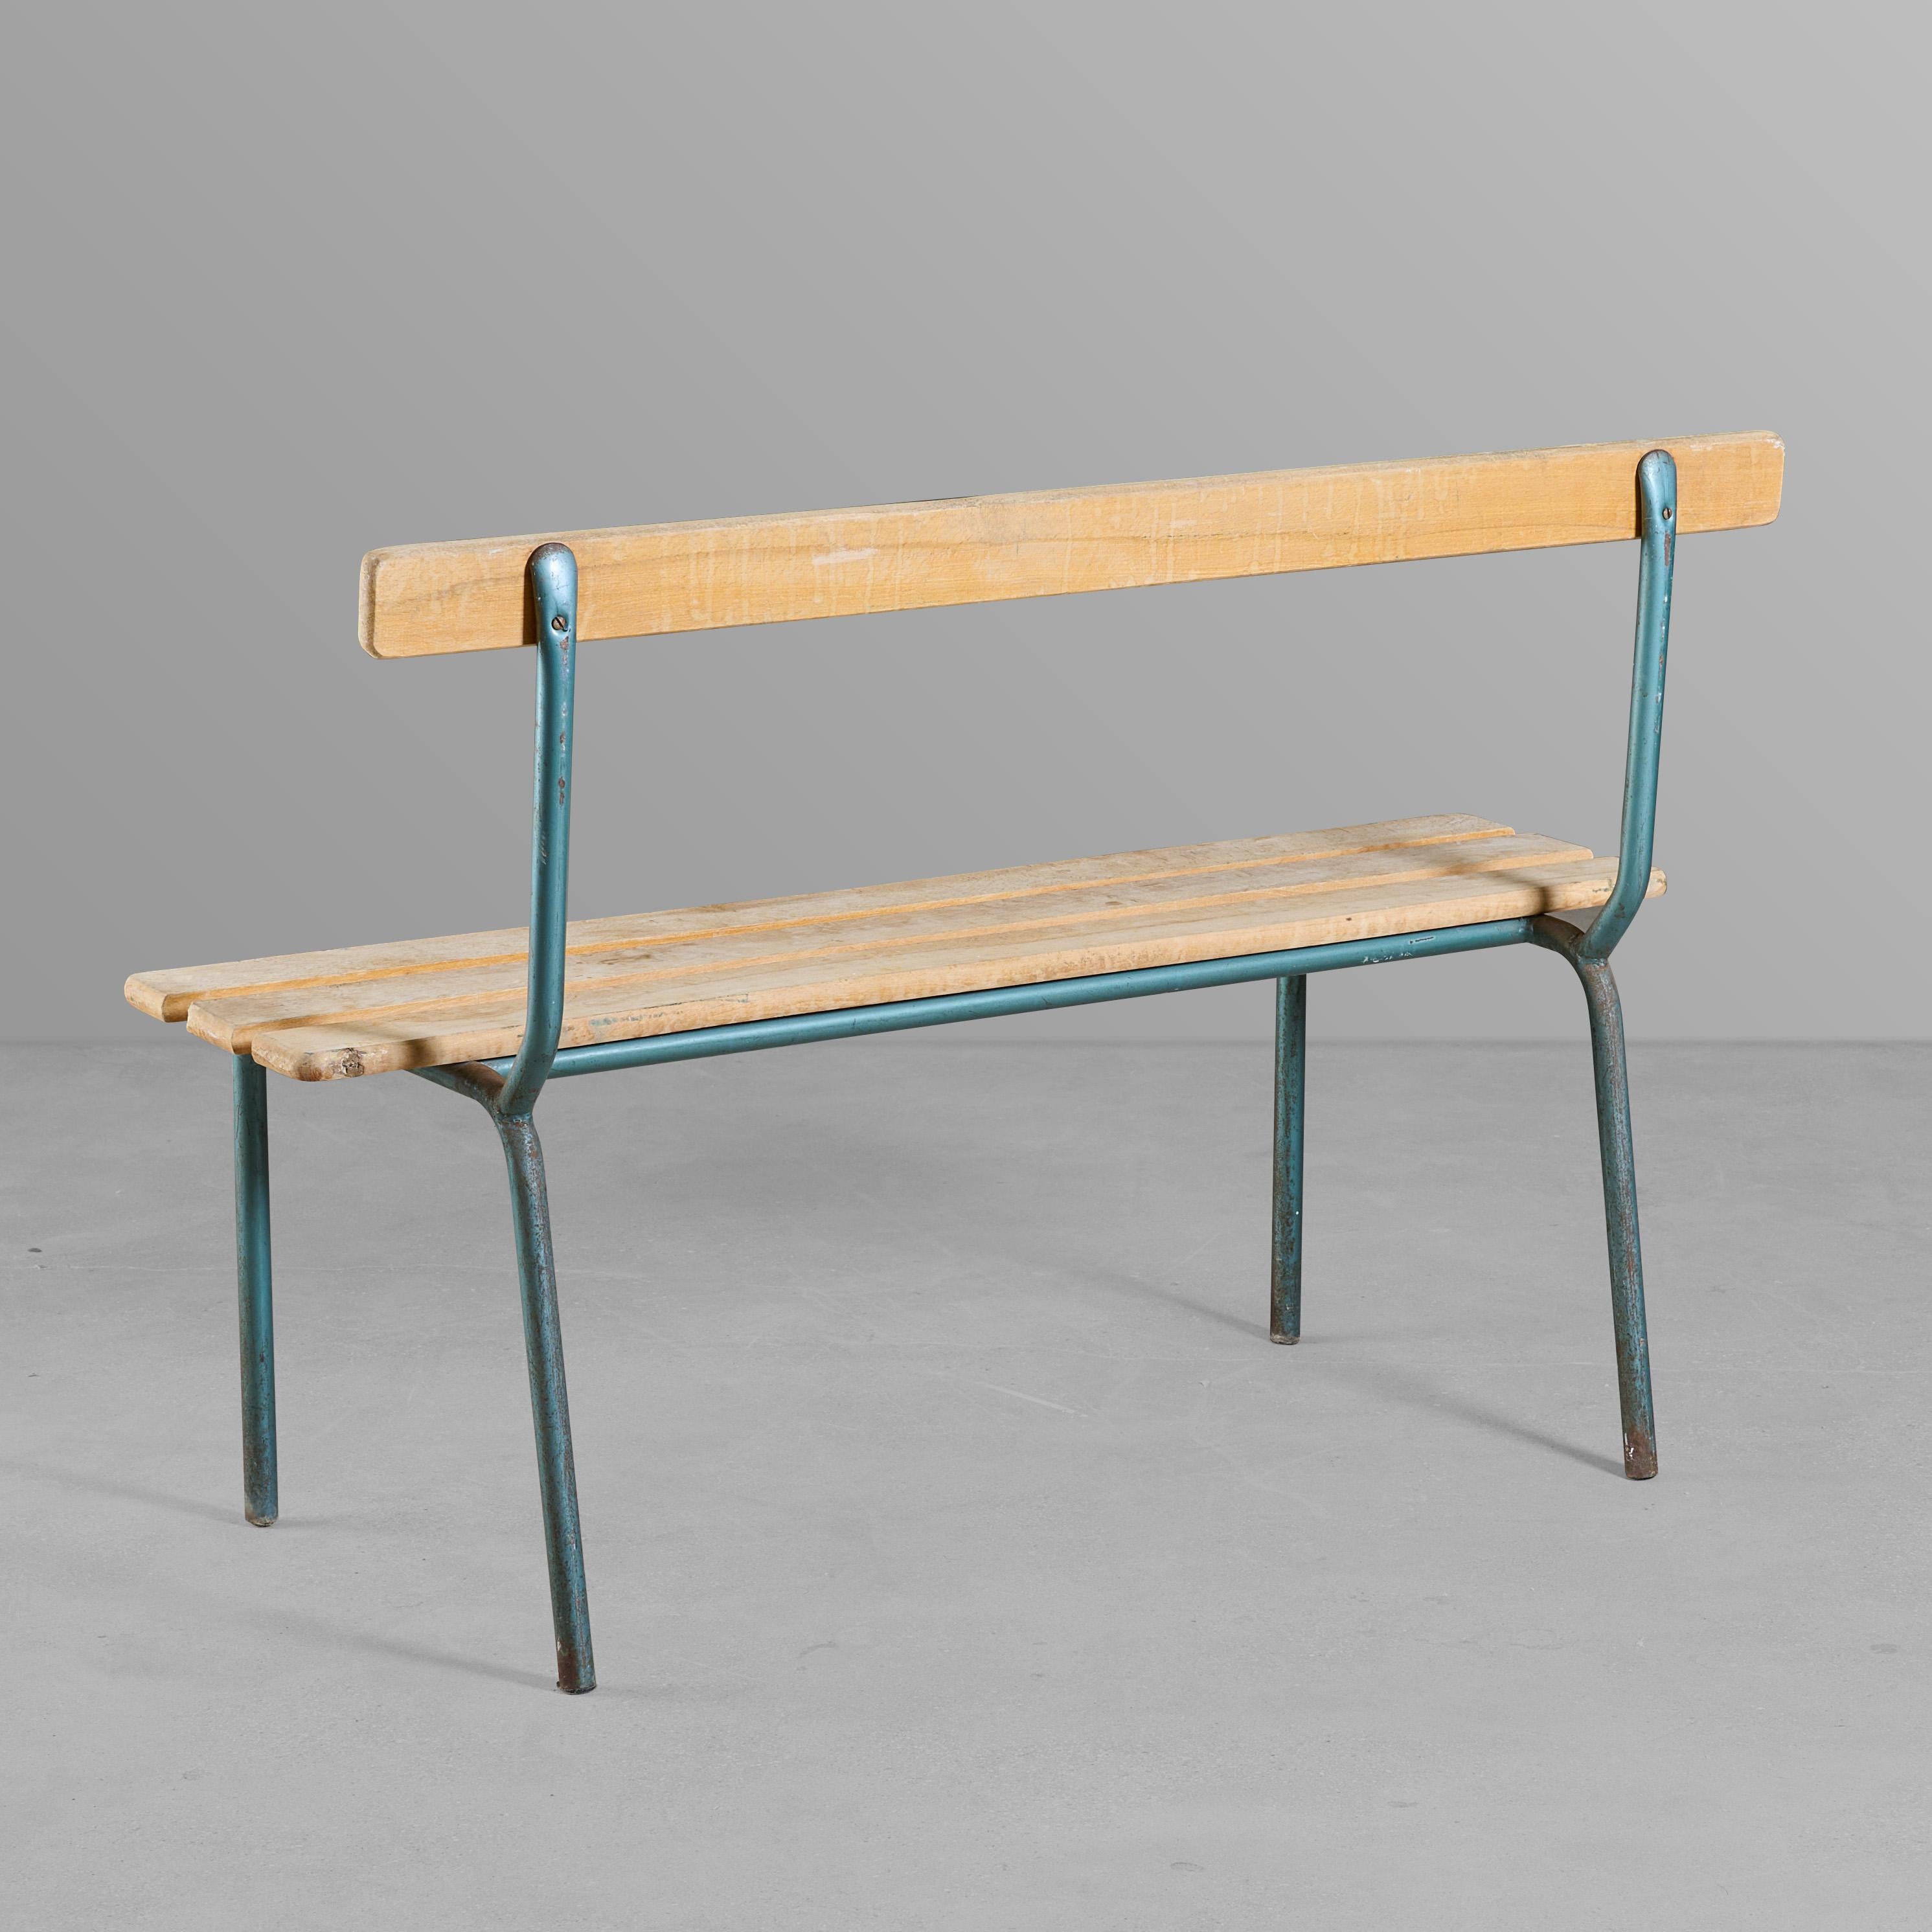 Iron and wood slat bench. For interior or exterior.